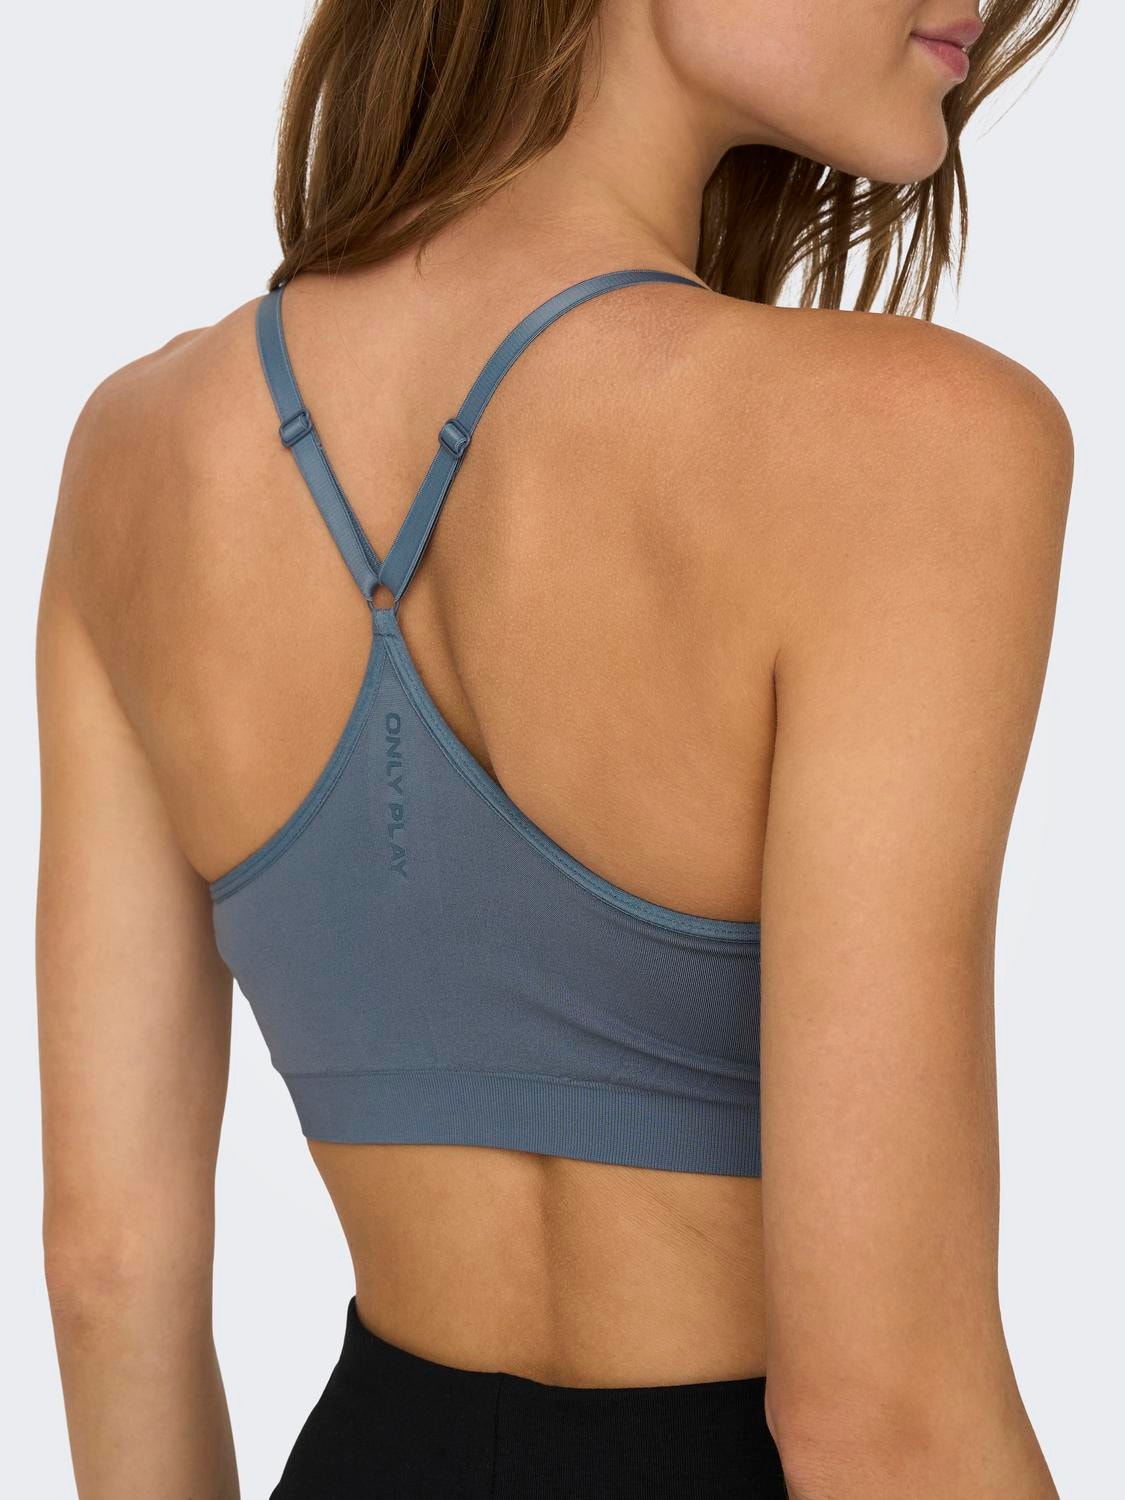 Seamless Sports Bra with 10% discount!